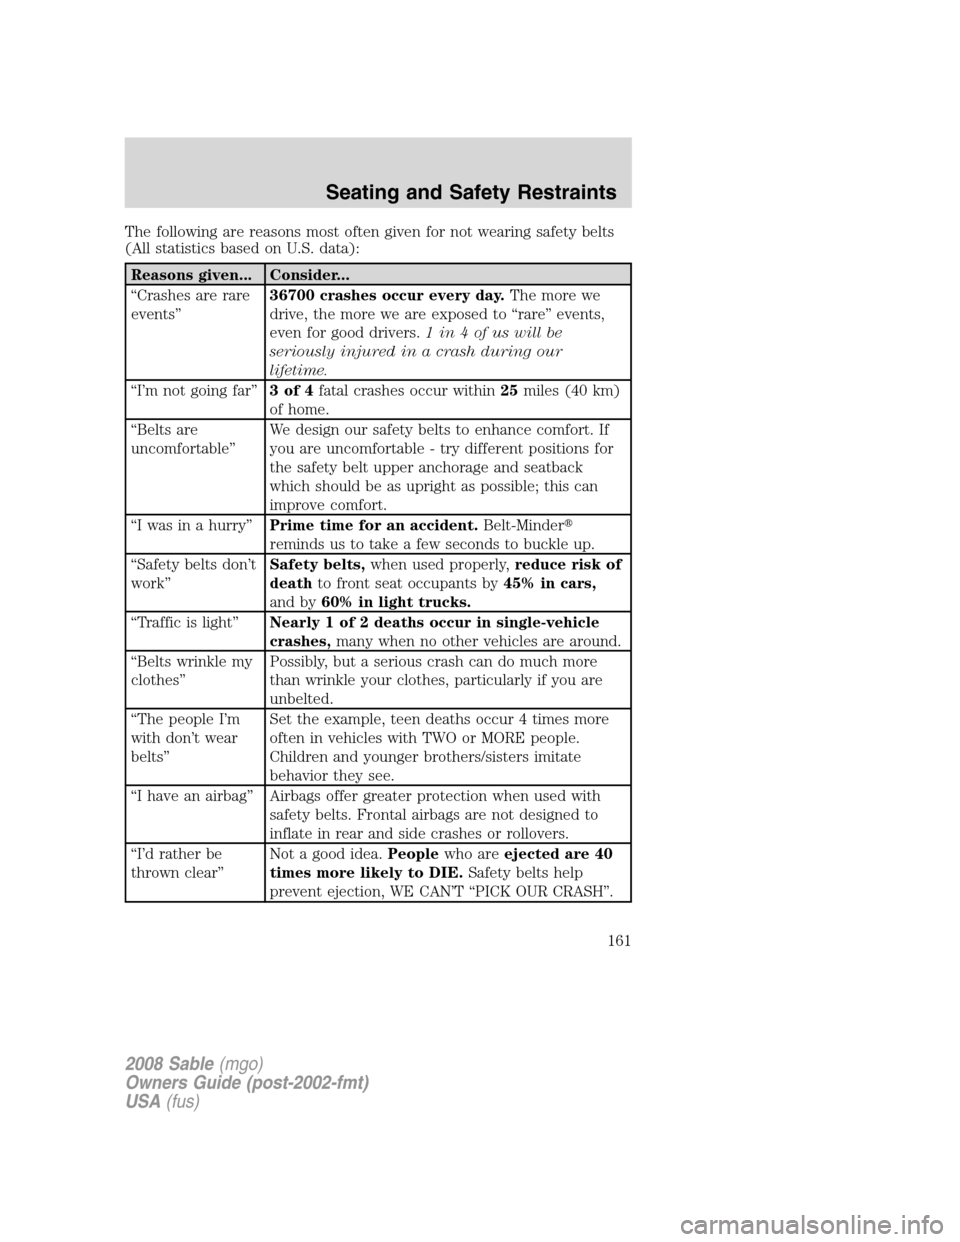 Mercury Sable 2008  Owners Manuals The following are reasons most often given for not wearing safety belts
(All statistics based on U.S. data):
Reasons given... Consider...
“Crashes are rare
events”36700 crashes occur every day.The